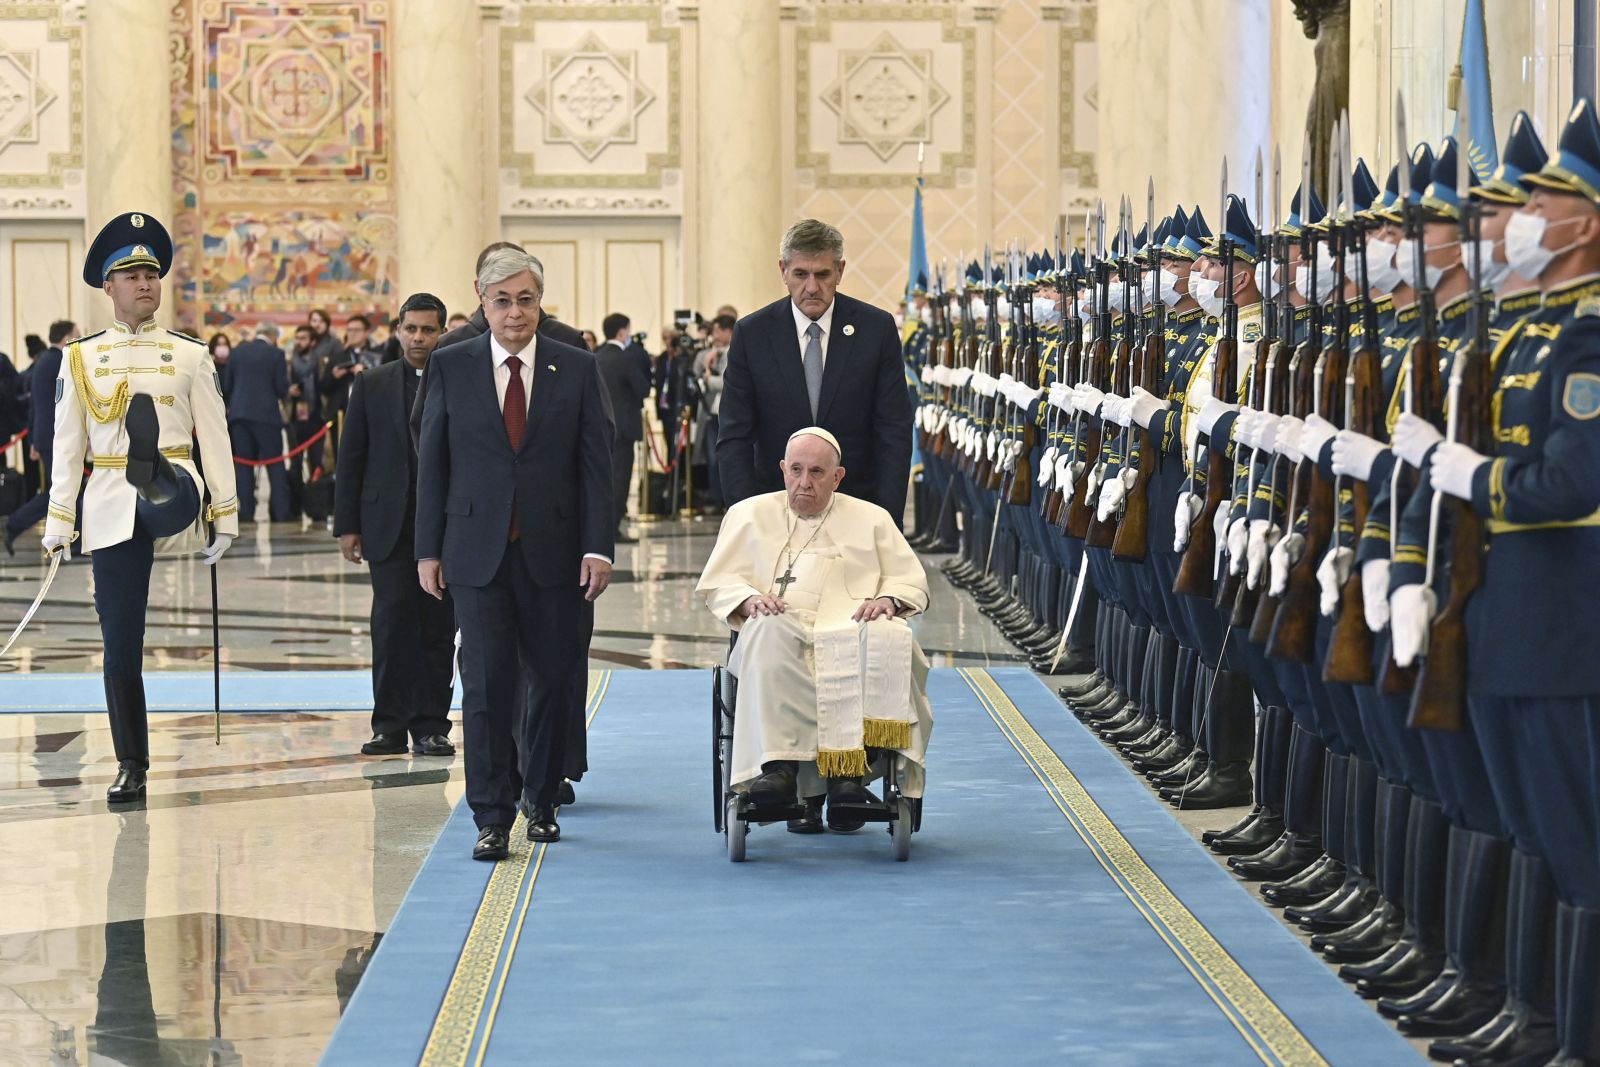 epa10181973 A handout photo made available by Kazakhstan President press-service shows Pope Francis (C) during the welcome ceremony with Kazakh President Kassym-Jomart Tokayev (2nd-L) at the Presidential Palace in Nur-Sultan, Kazakhstan, 13 September 2022. The Pope is planned to meet with President Tokayev and hold a meeting with participants in the VII Congress of Leaders of World and Traditional Religions.  EPA/KAZAKHSTAN PRESIDENT PRESS SERVICE/HANDOUT HANDOUT  HANDOUT EDITORIAL USE ONLY/NO SALES